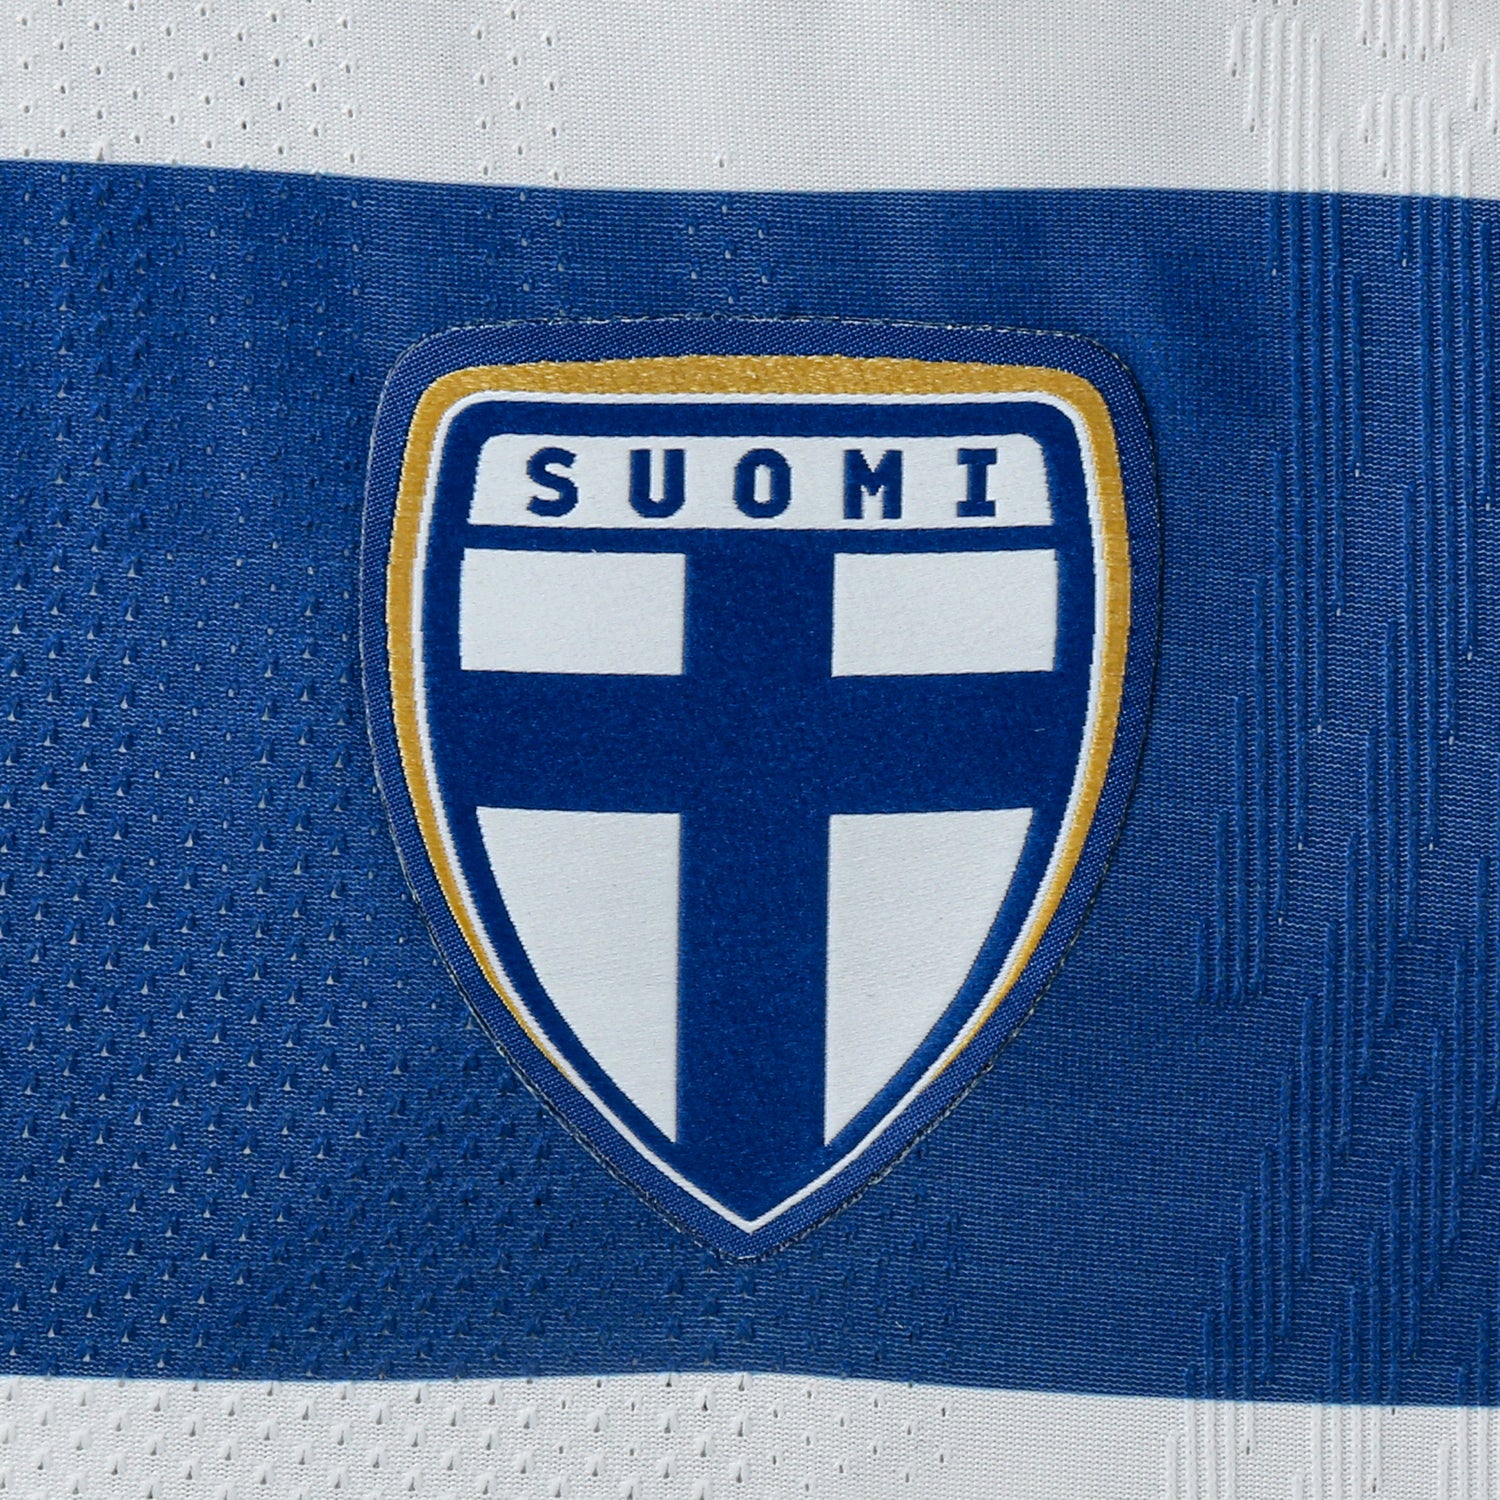 Finland Official Home Jersey 2022/23, Soiri Print